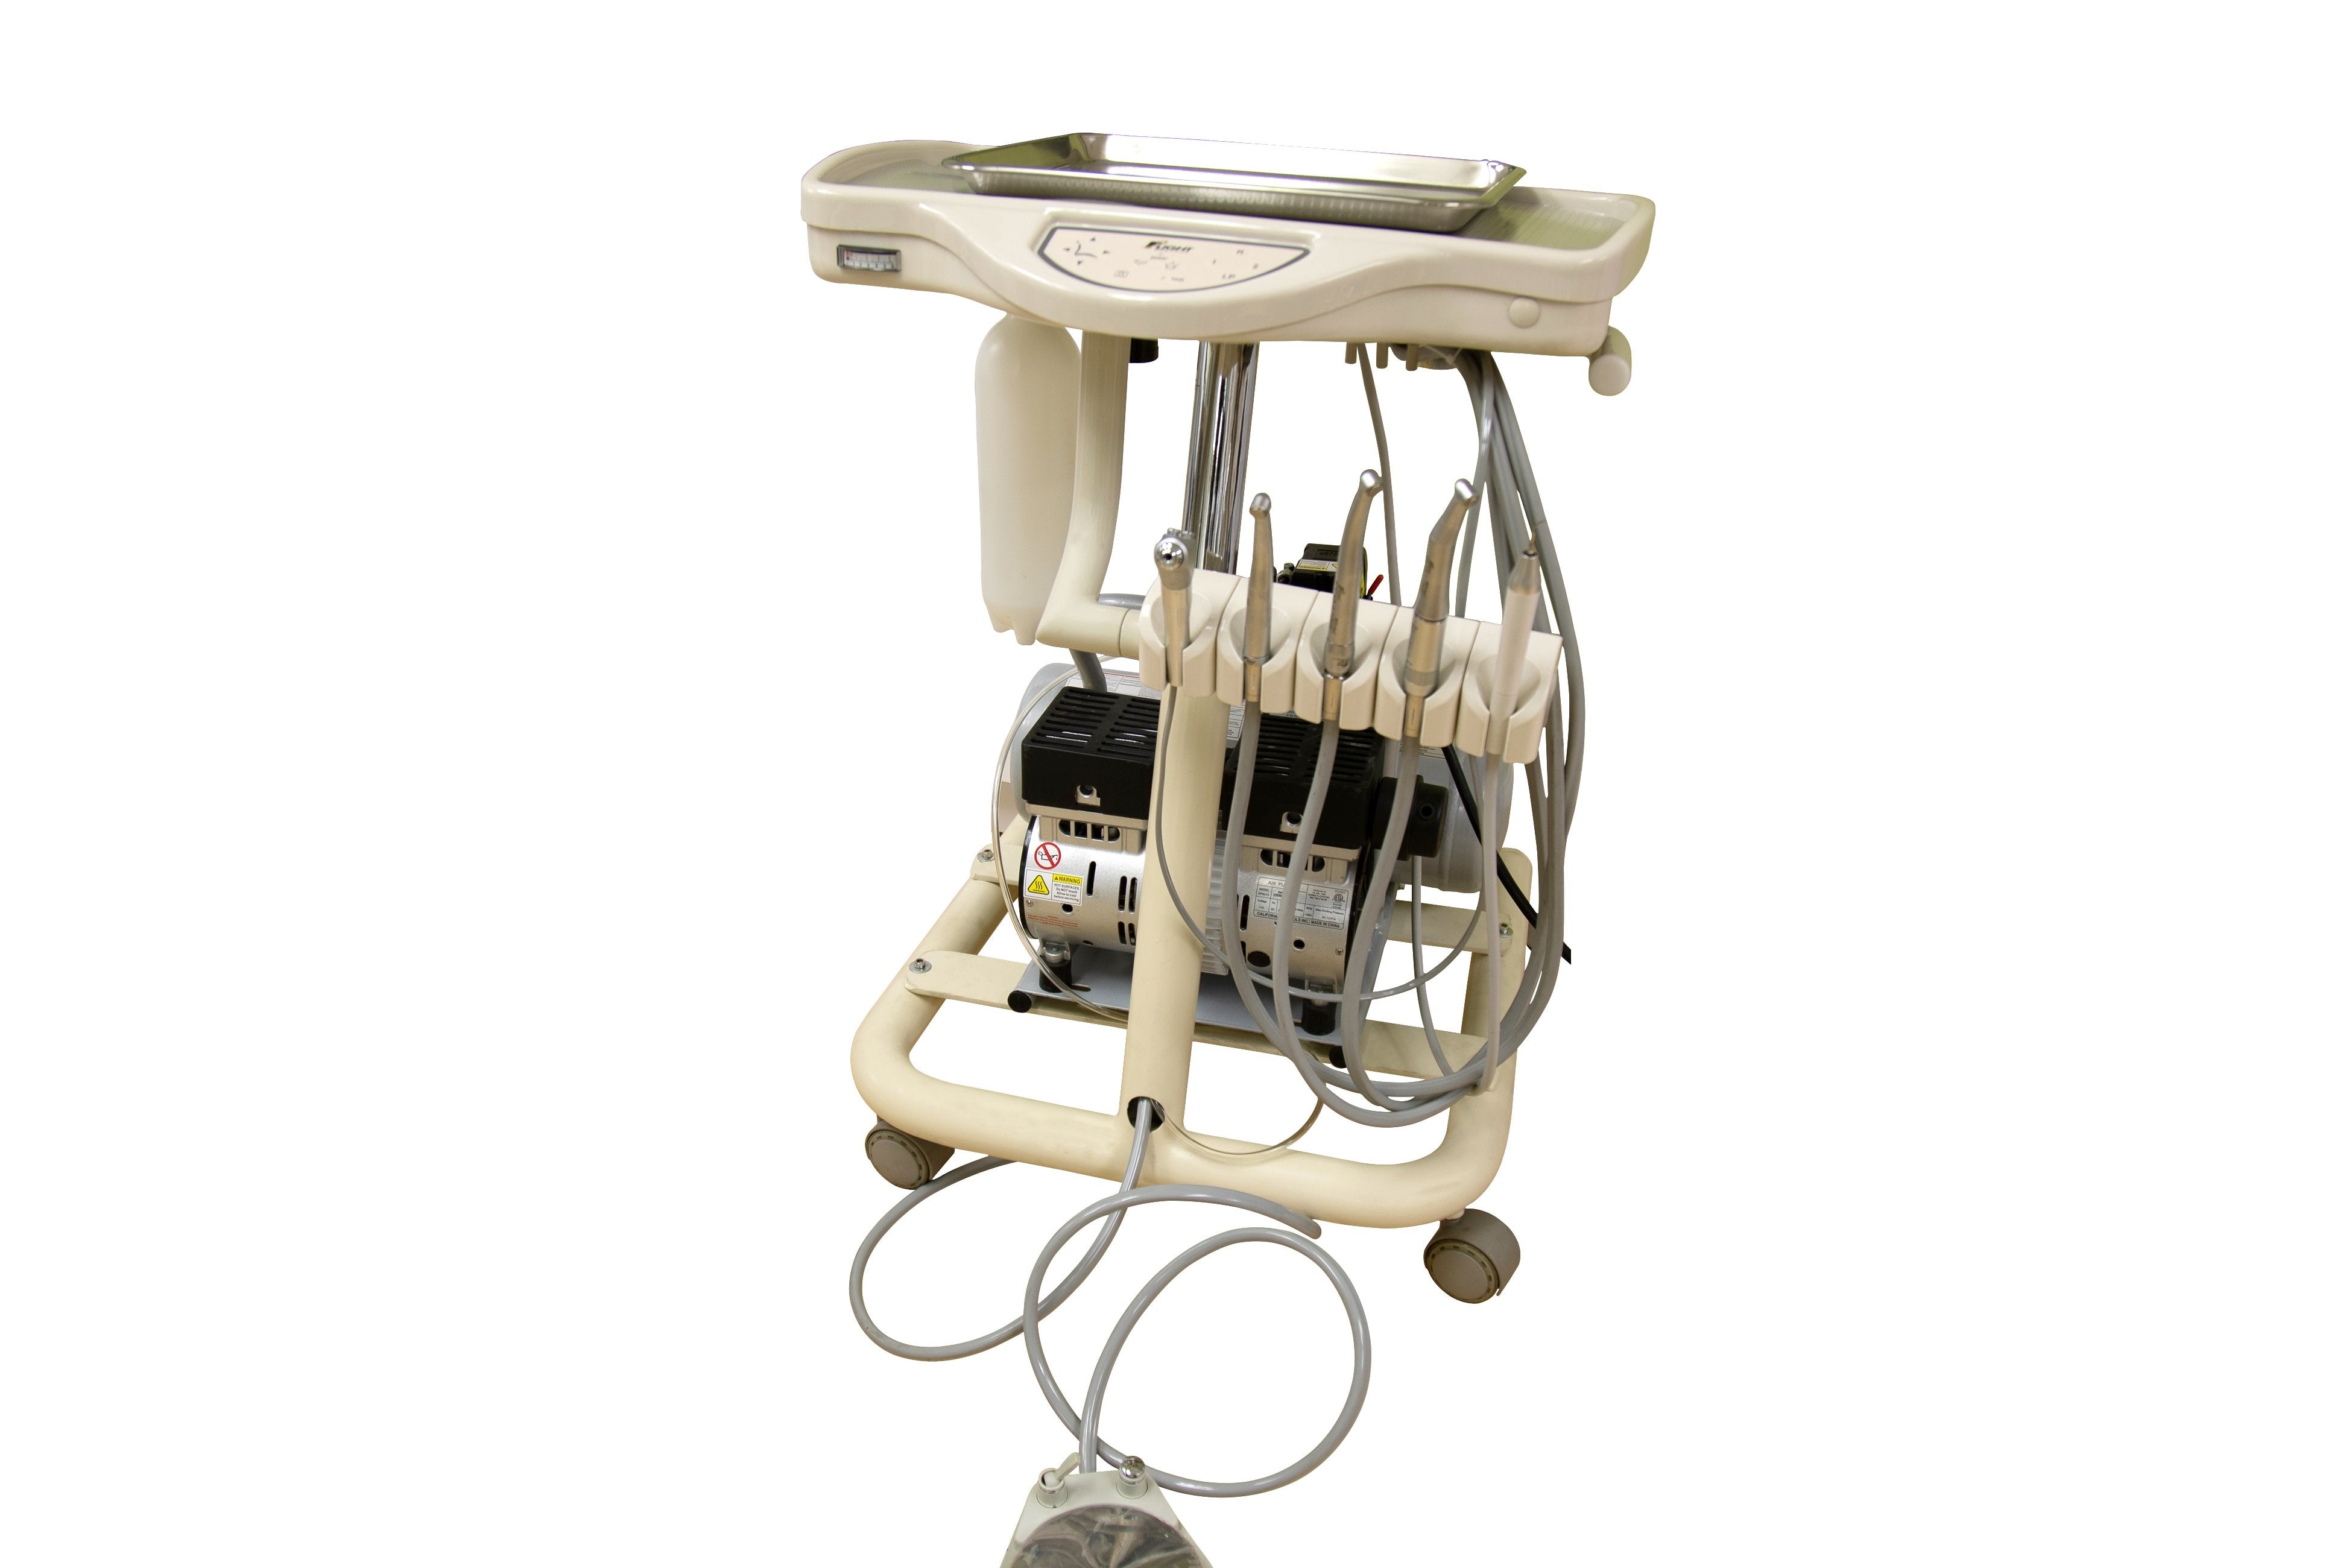 Flight Dental System MC-1300FC Portable Mobile Cart with Integrated Compressor with 1 Year Warranty